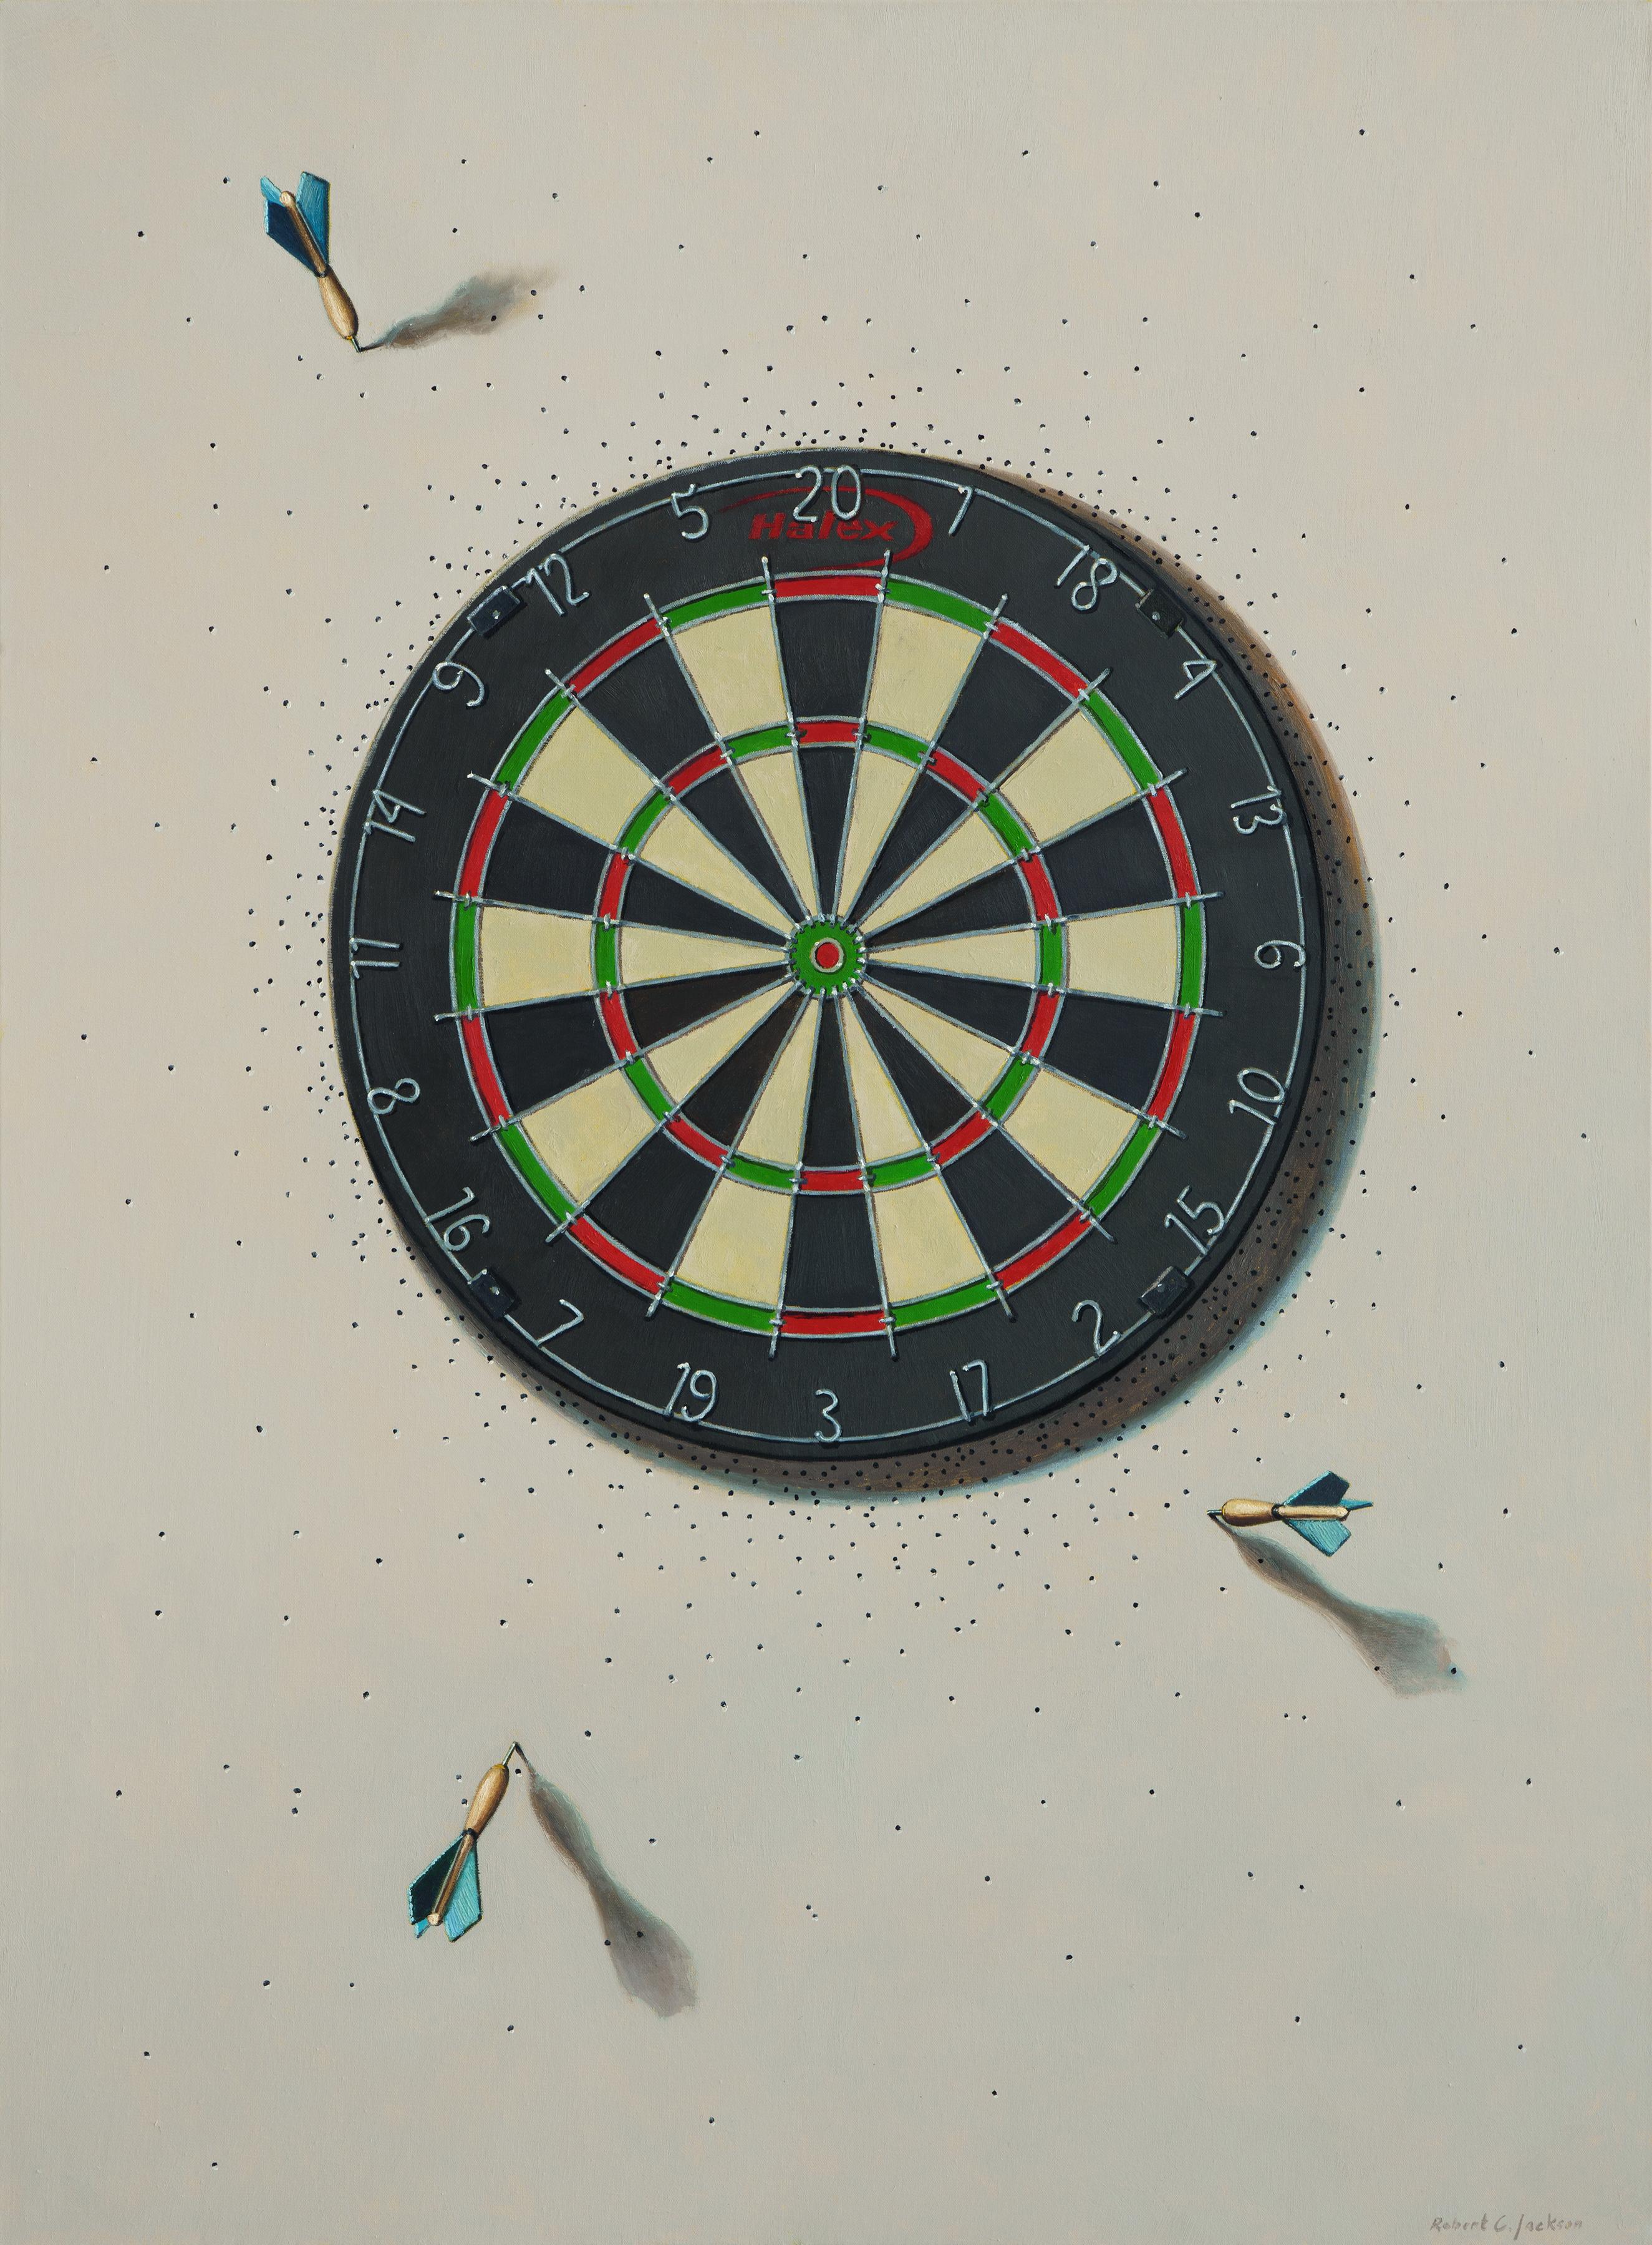 OUT OF PRACTICE - Trompe L'oeil / Contemporary Realism / Dartboard / Games